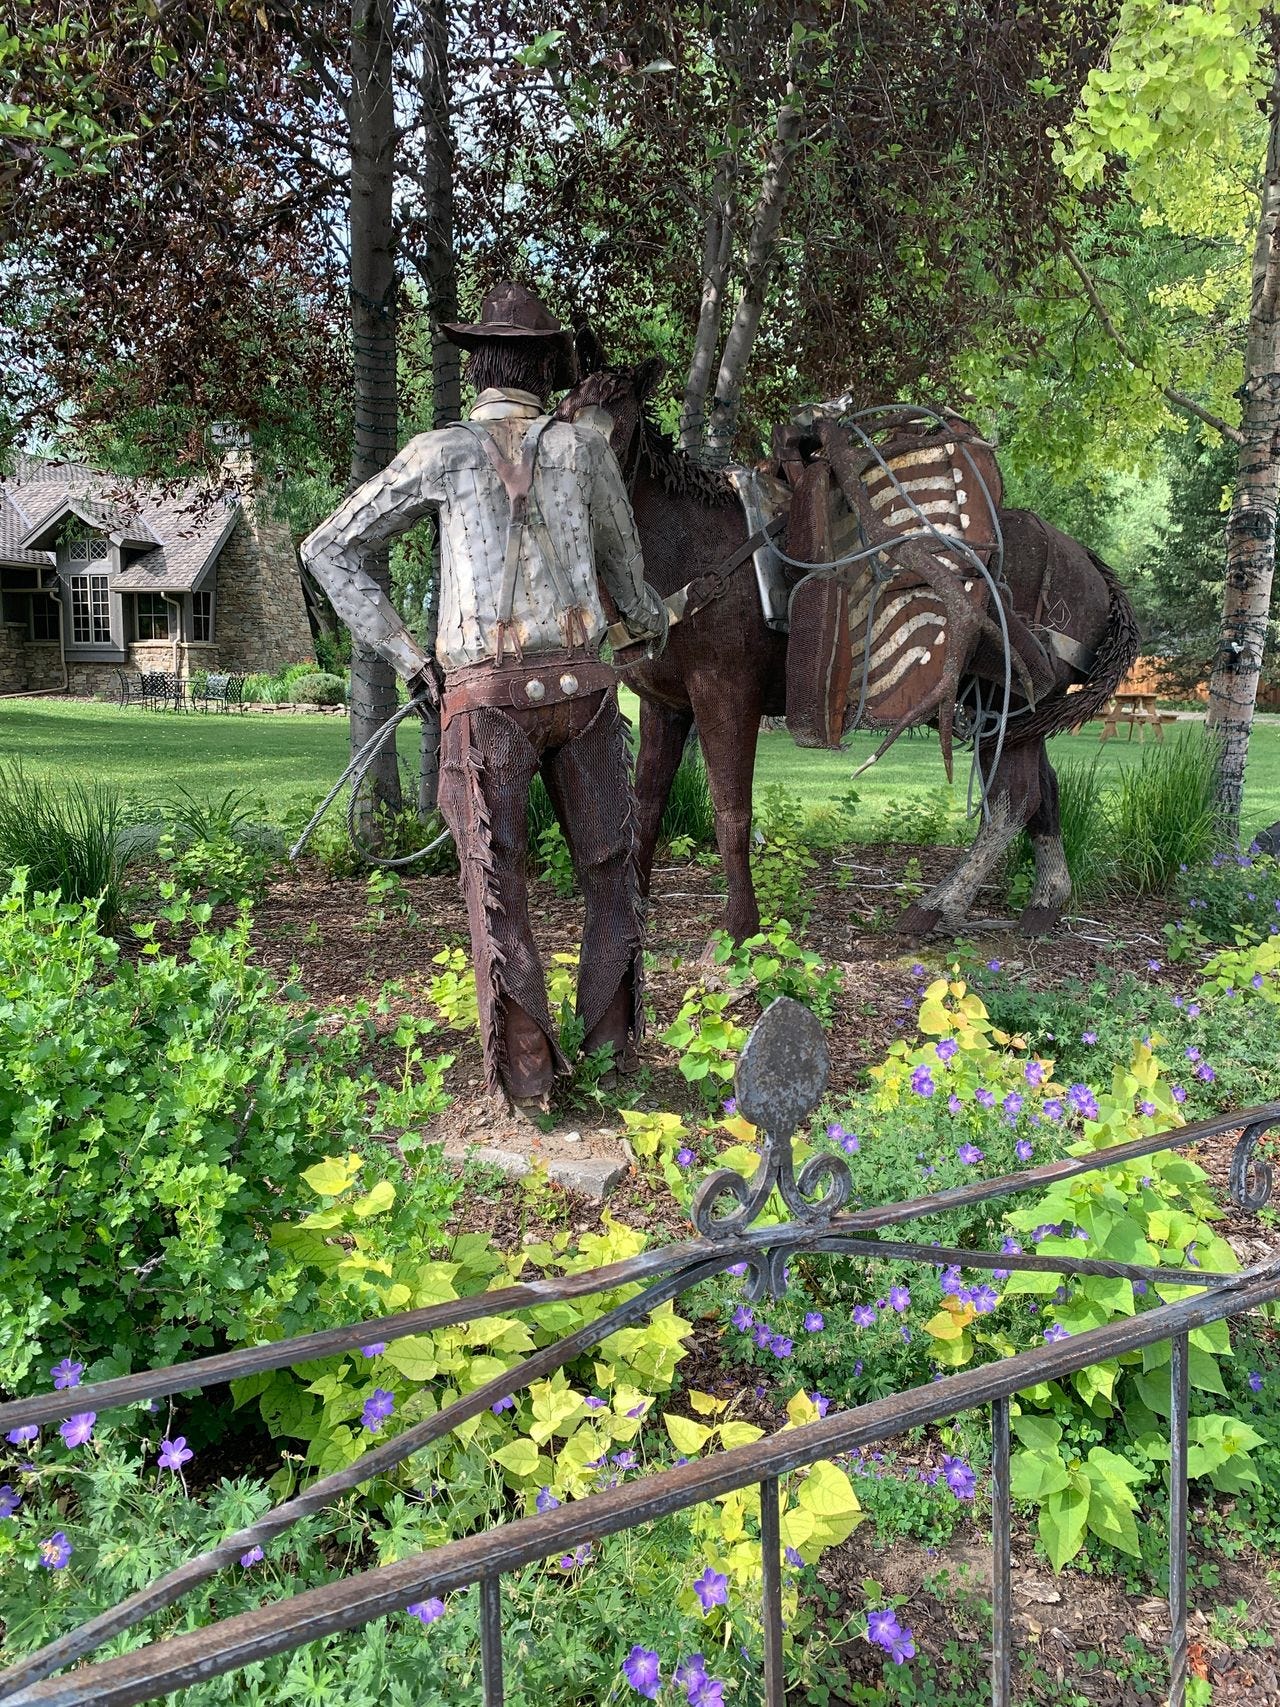 Metal art sculptures are featured all around downtown Ennis, Montana.